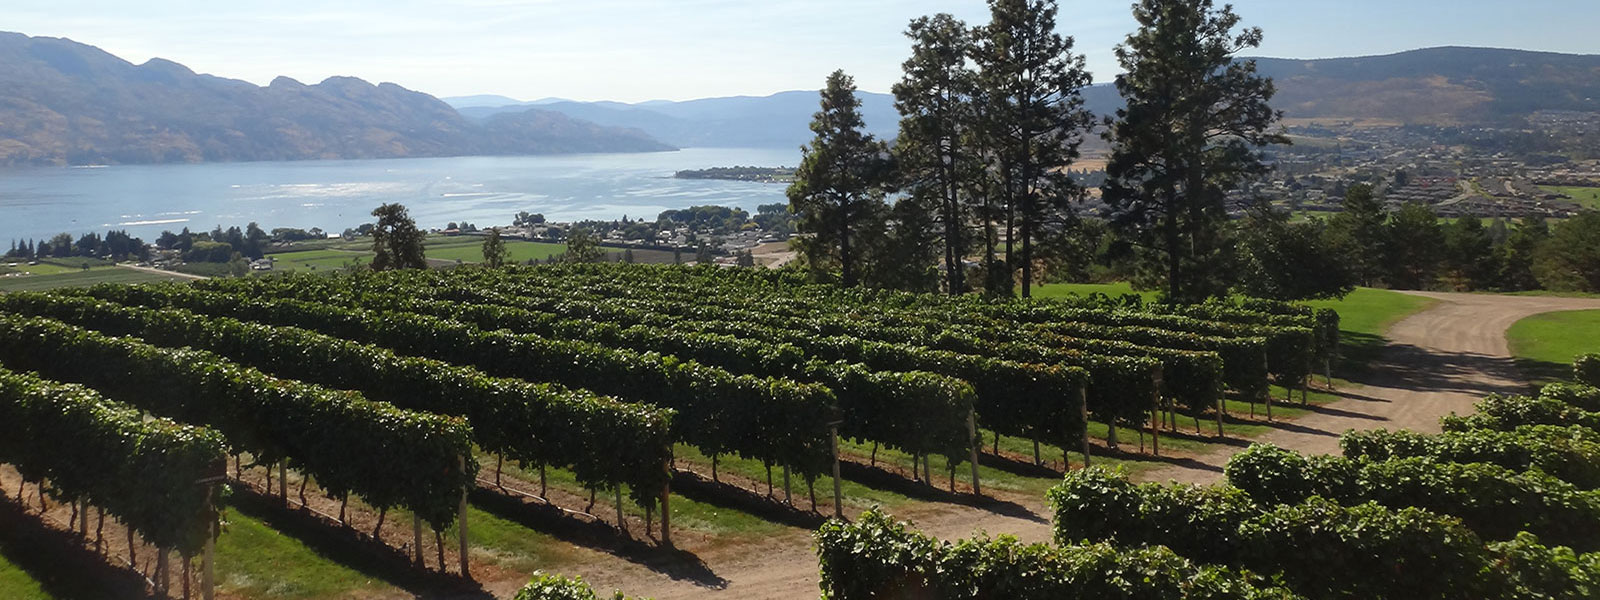 A View of the Lake - Our B & B offers luxurious accommodations in the heart of the beautiful Okanagan Valley.